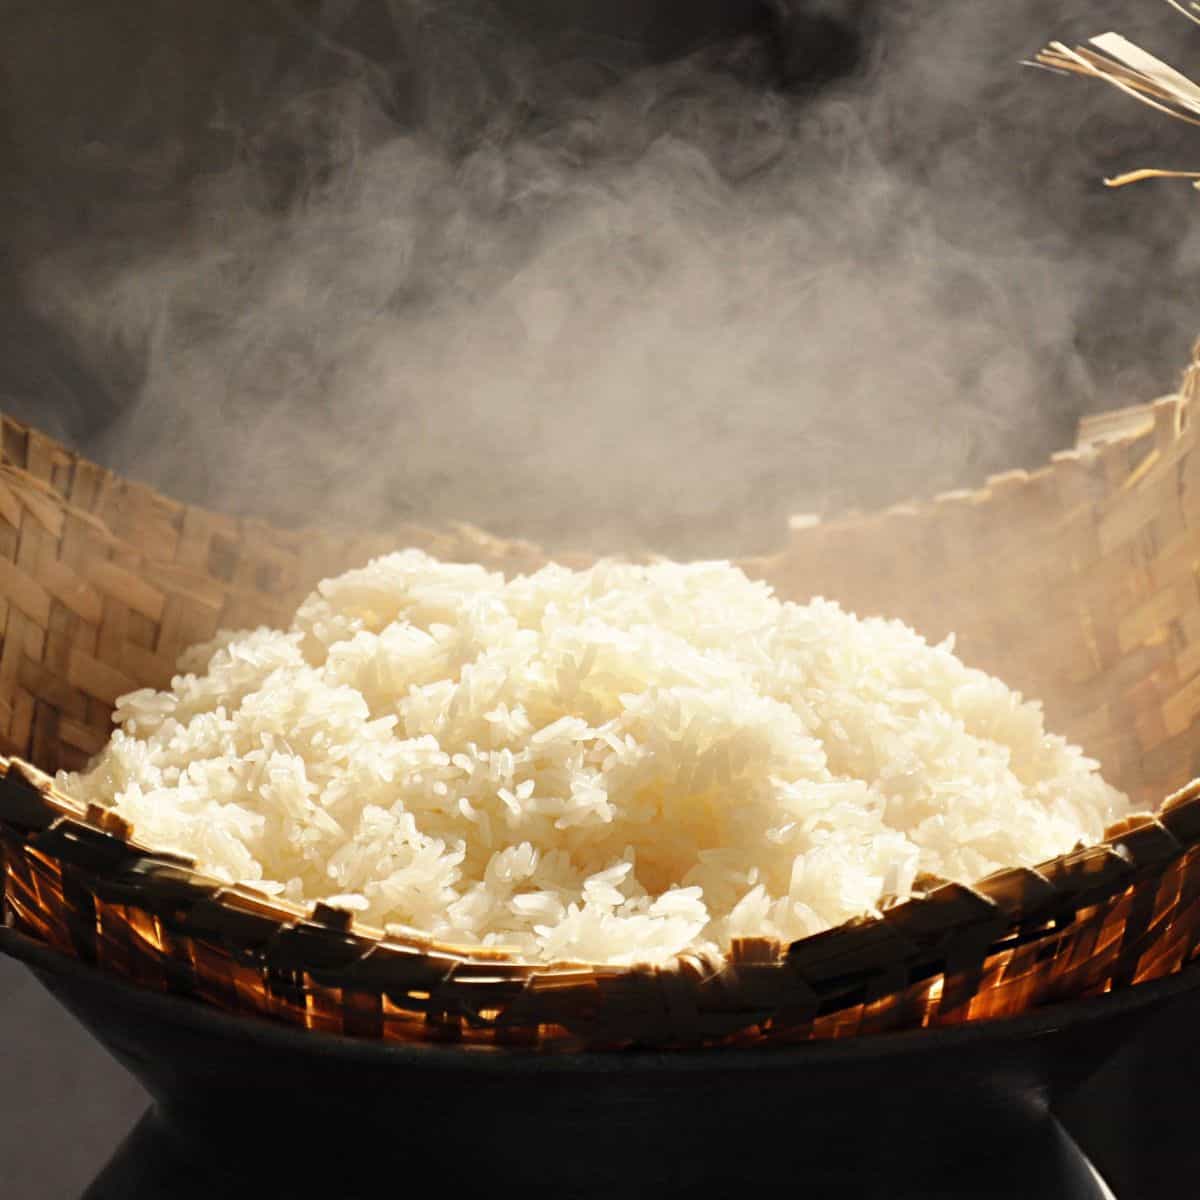 How to Make Sticky Rice (Foolproof Method!) - The Woks of Life